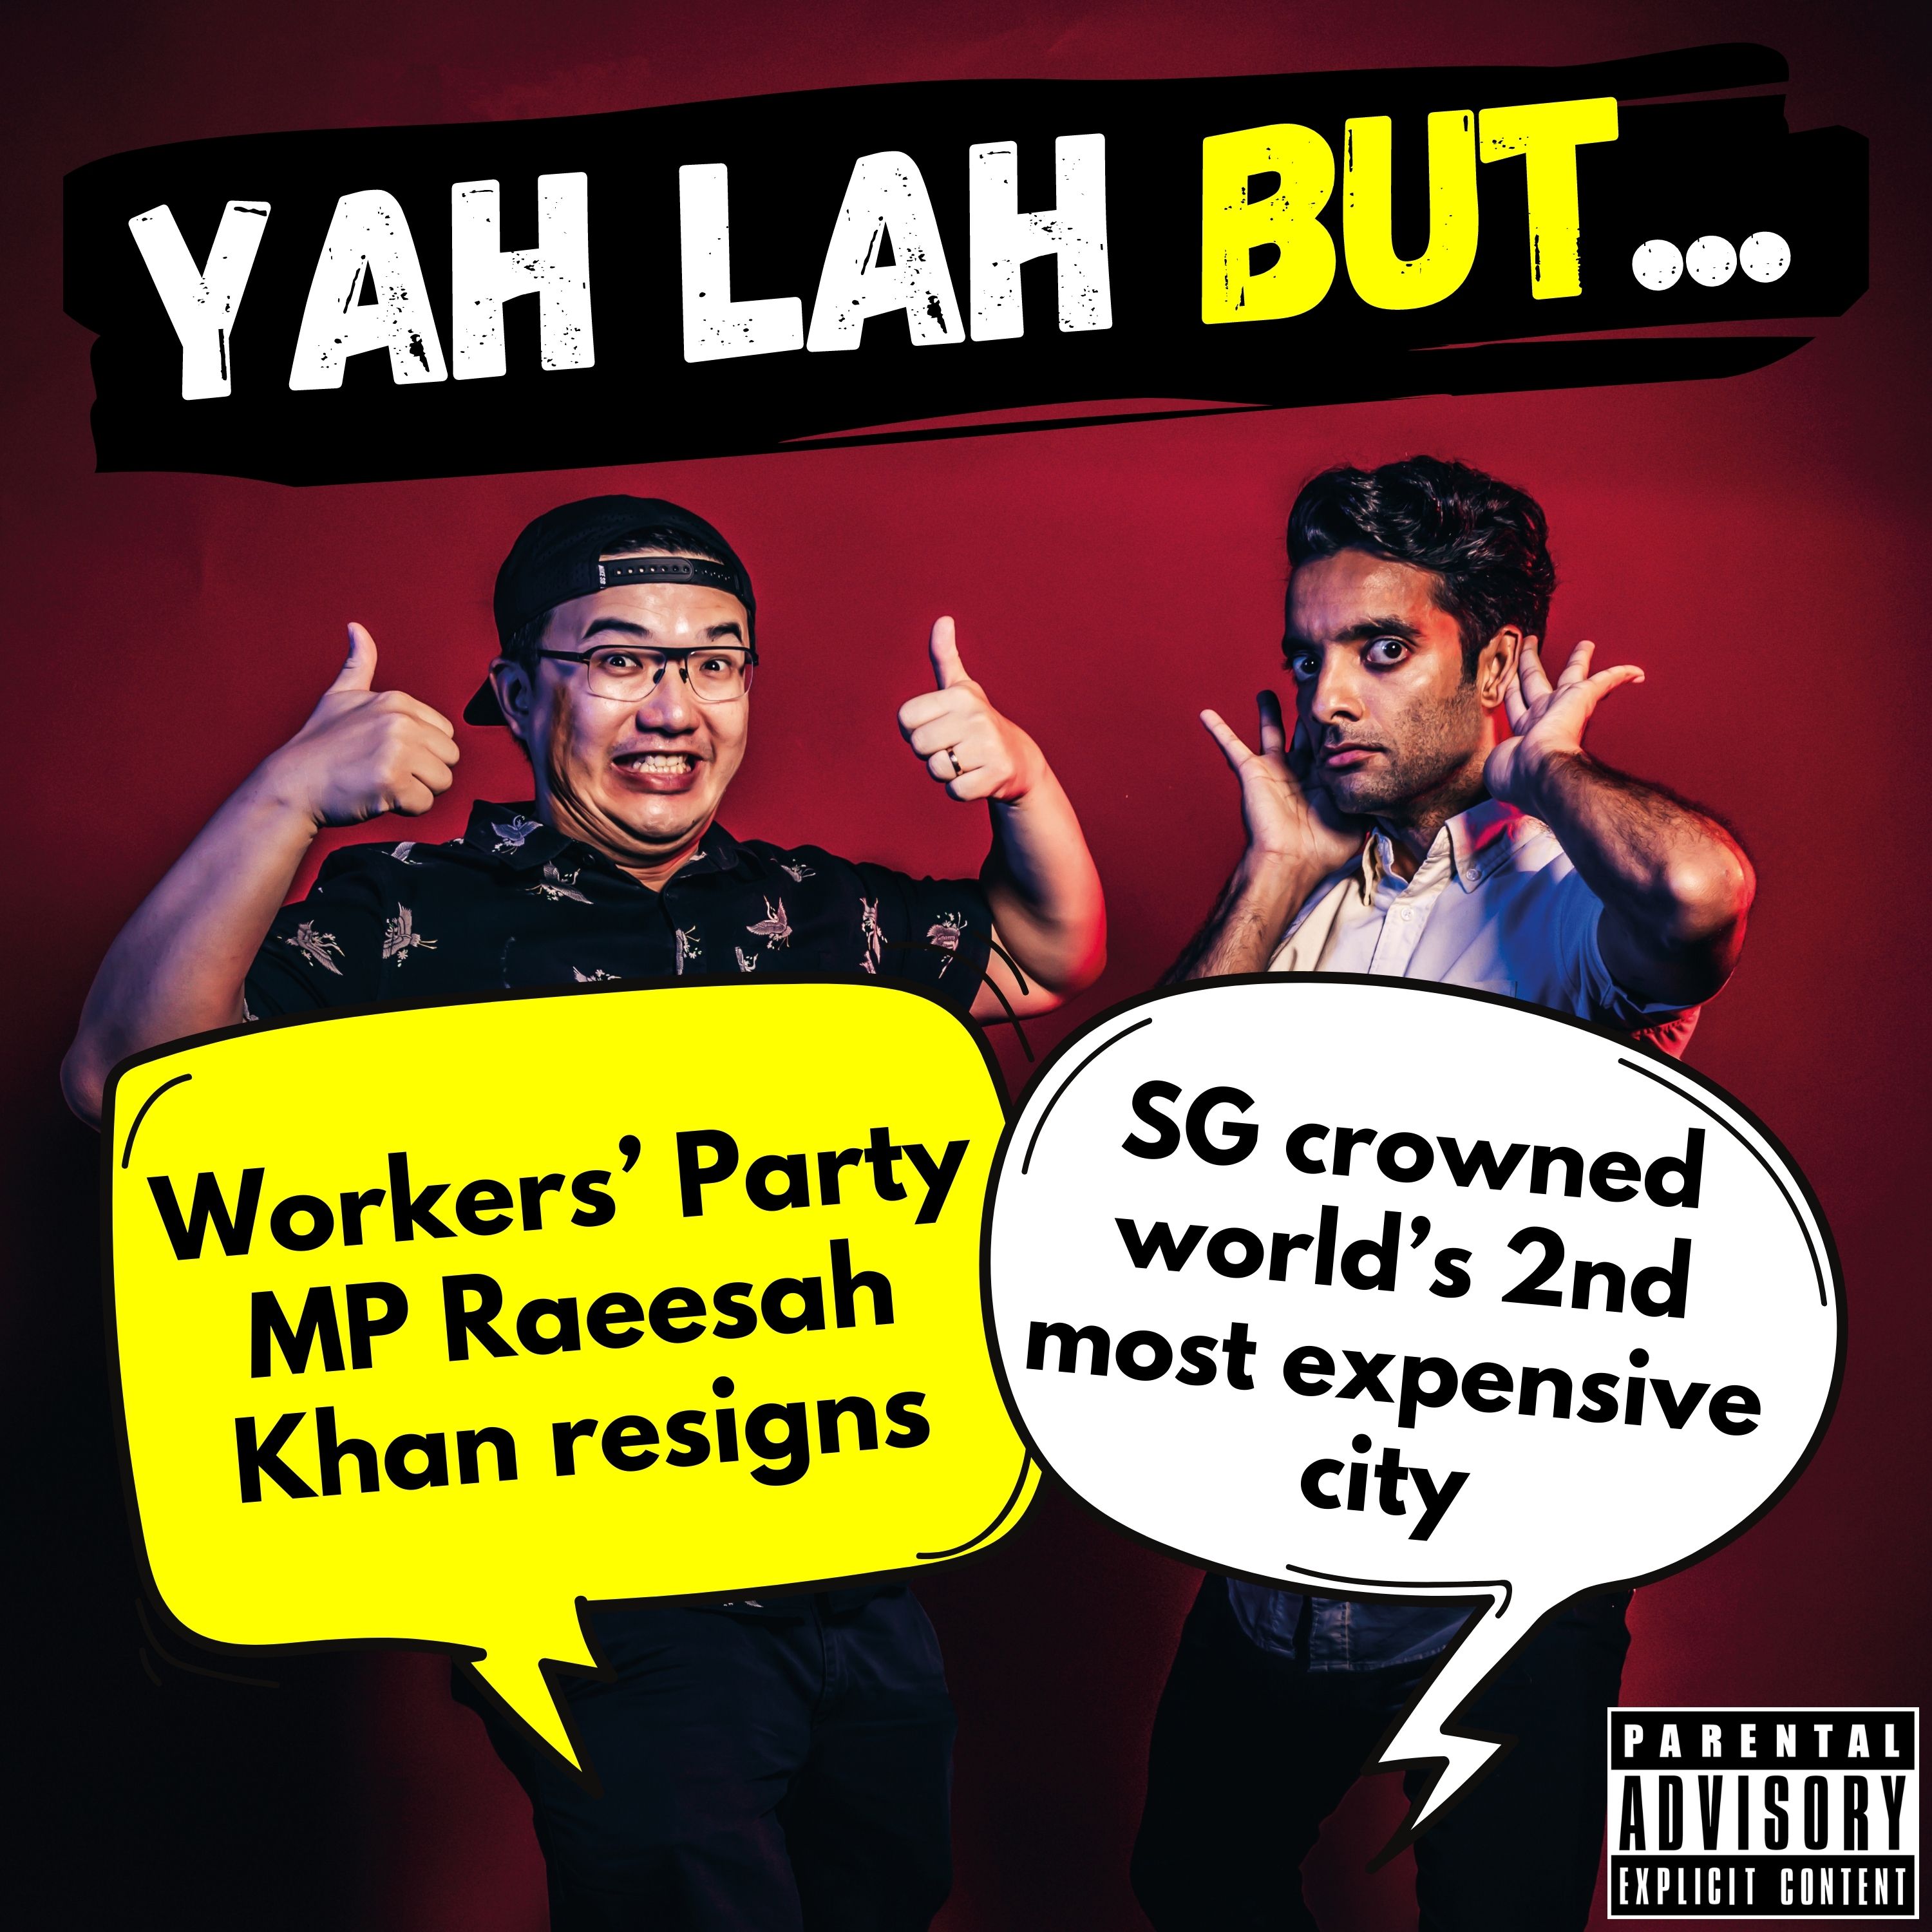 #239 - Workers’ Party MP Raeesah Khan resigns & Singapore crowned world’s second most expensive city